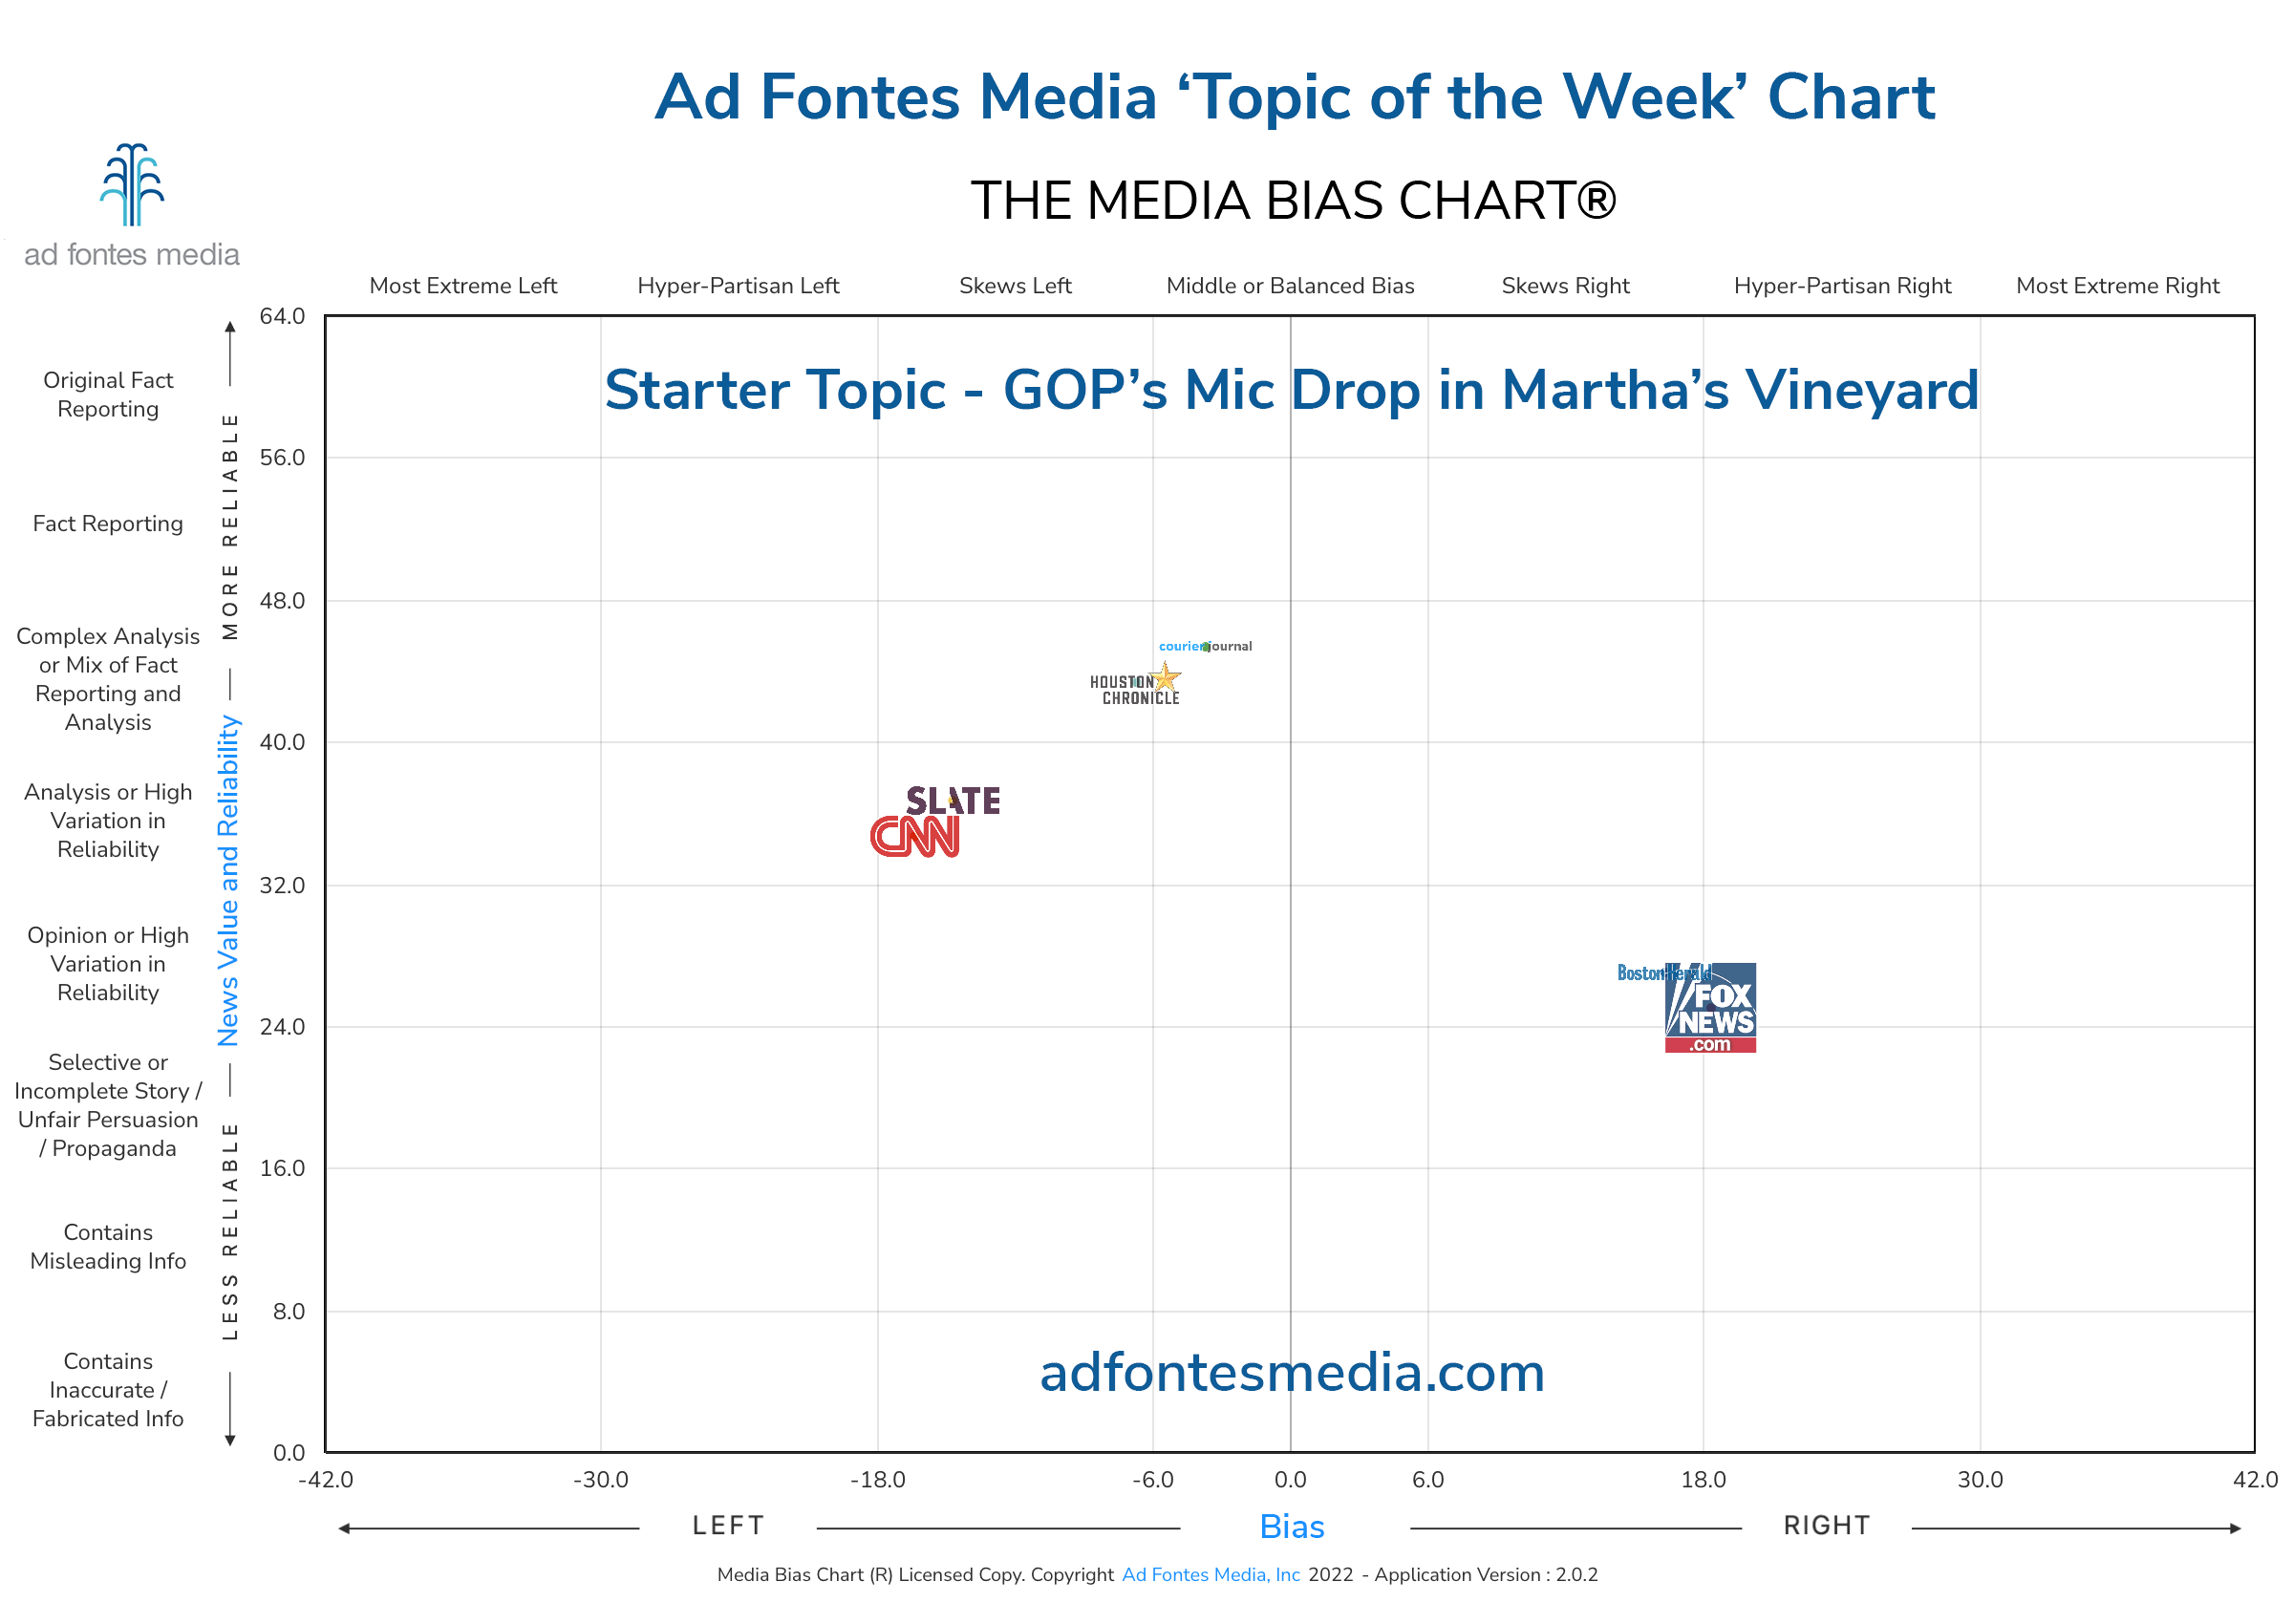 Scores of GOP’s Mic Drop in Martha’s Vineyard articles on the chart